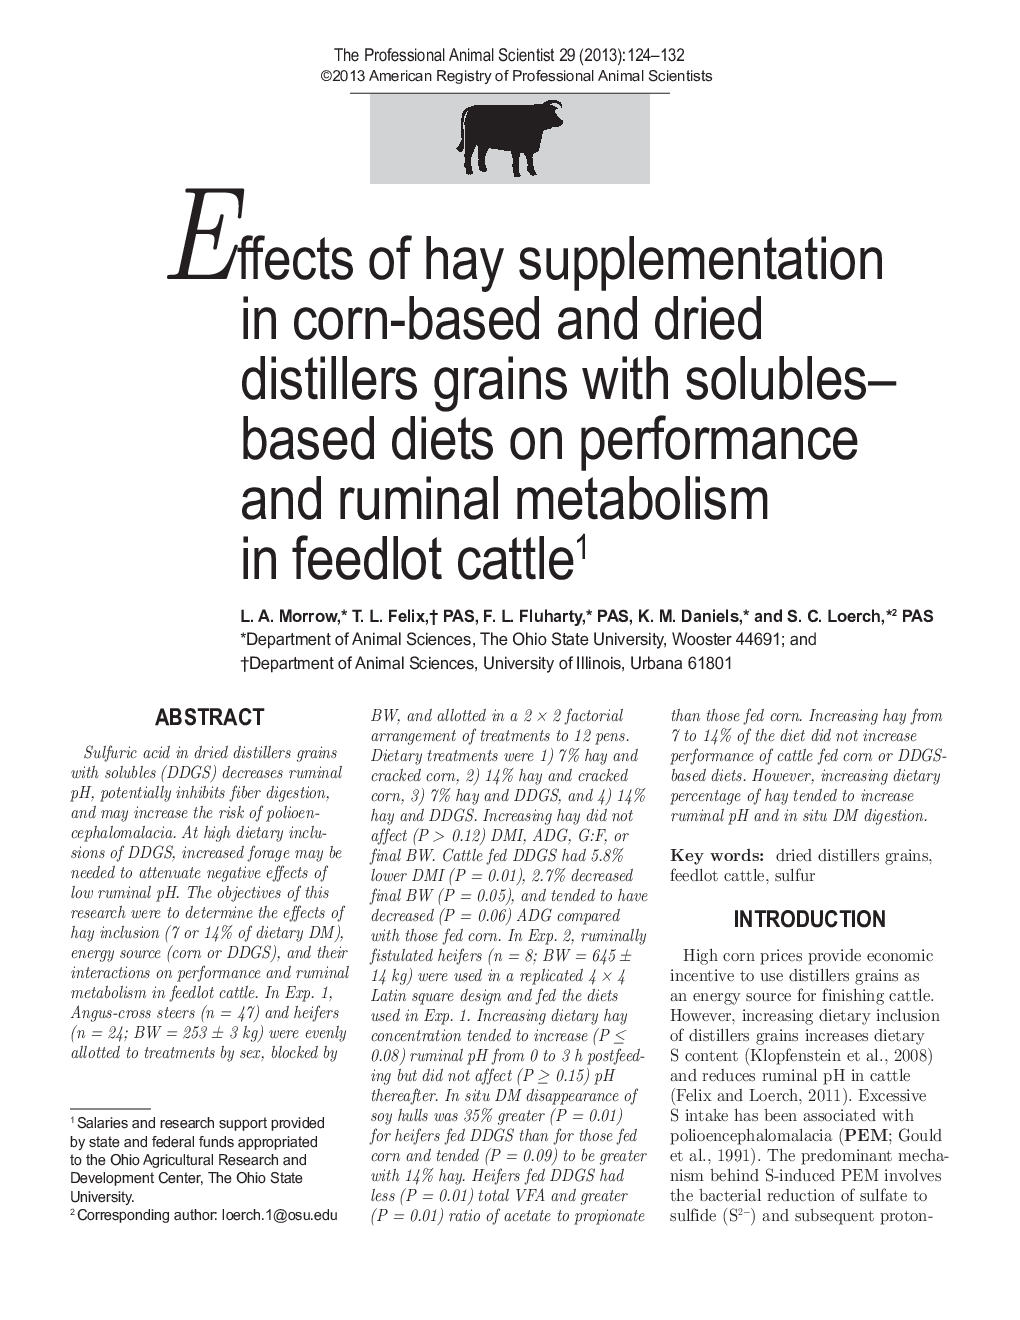 Effects of hay supplementation in corn-based and dried distillers grains with solubles-based diets on performance and ruminal metabolism in feedlot cattle1